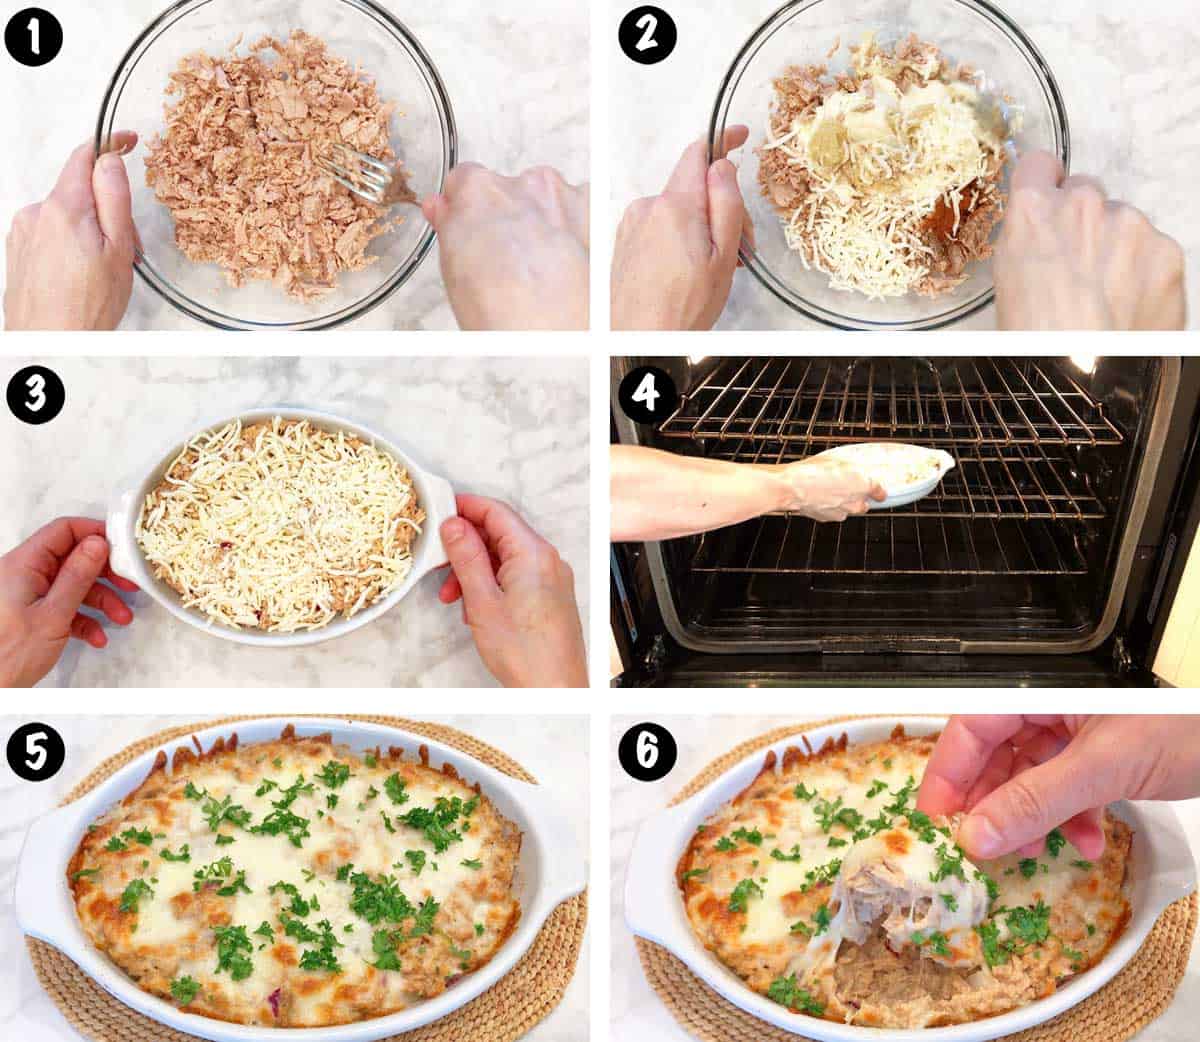 A six-photo collage showing the steps for making a tuna casserole. 